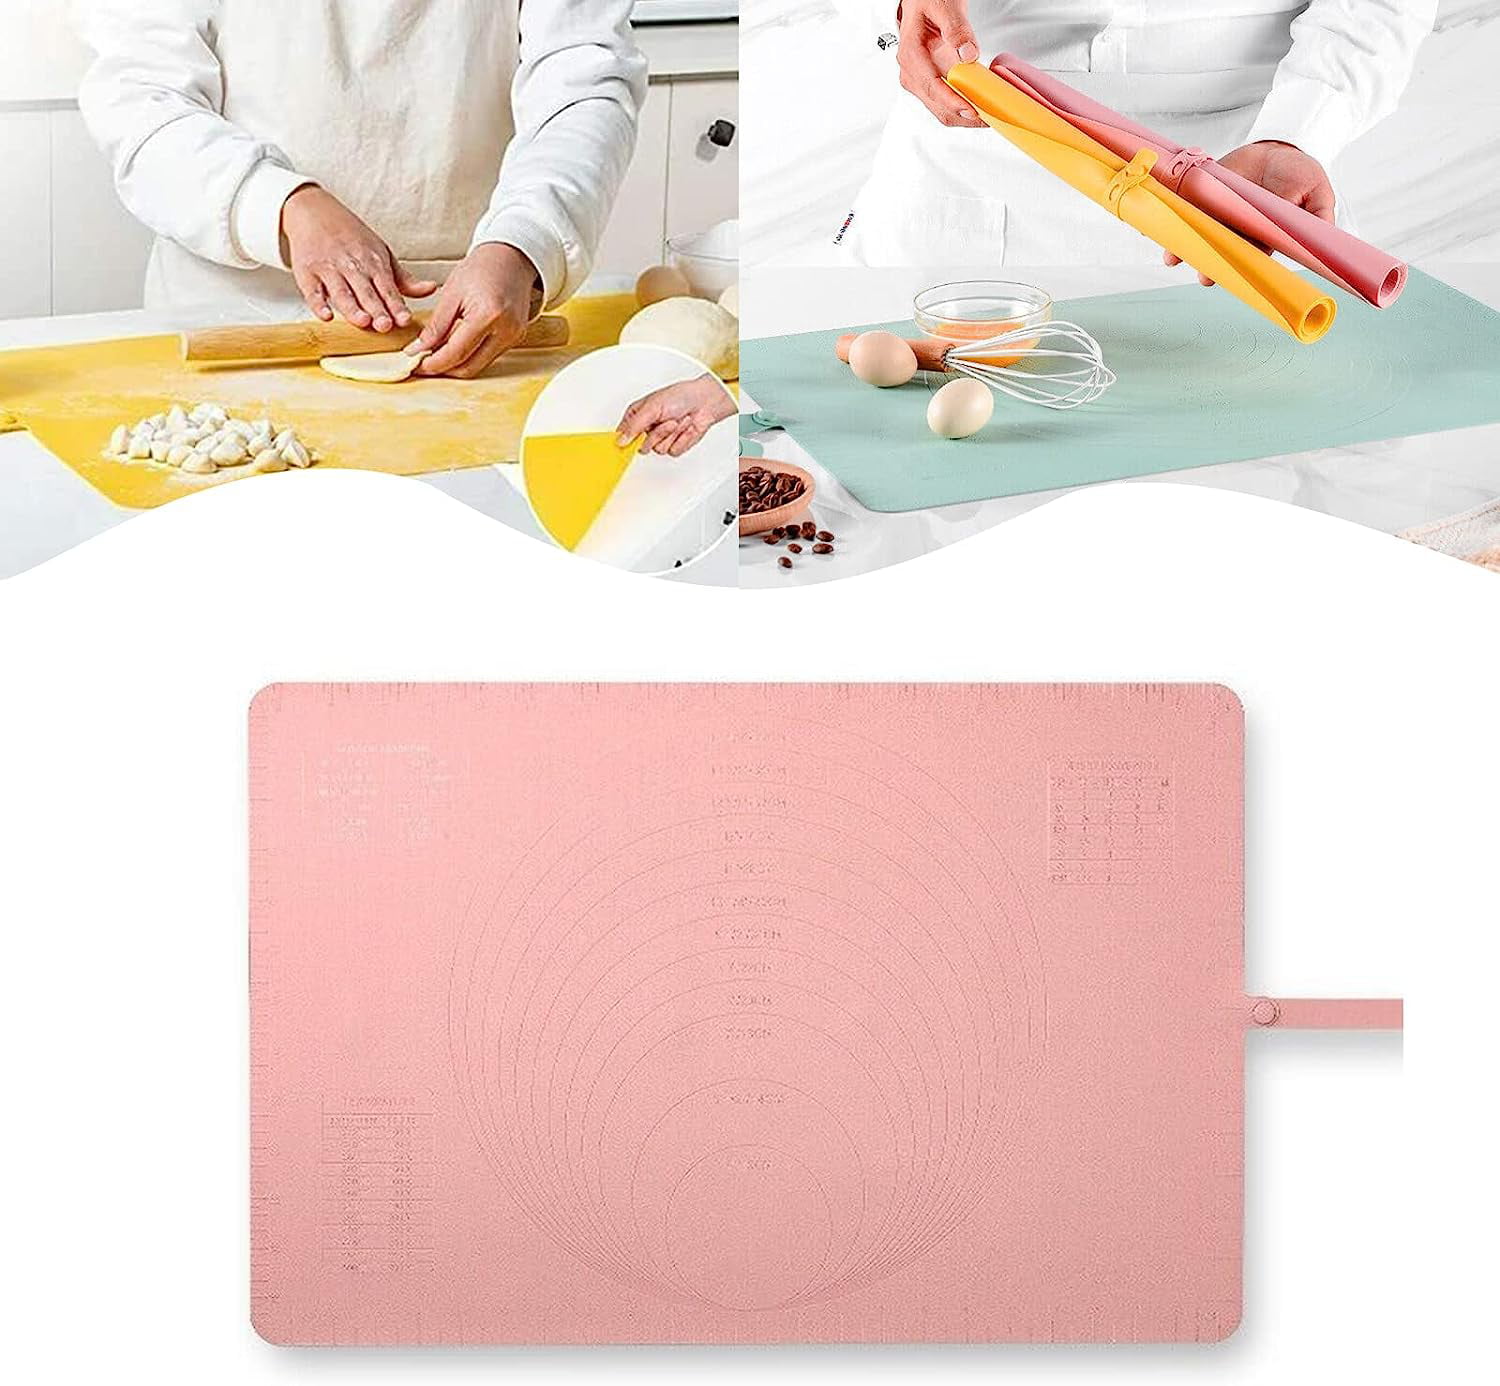  Extra Large Kitchen Silicone Pad,Non-stick Baking Mat